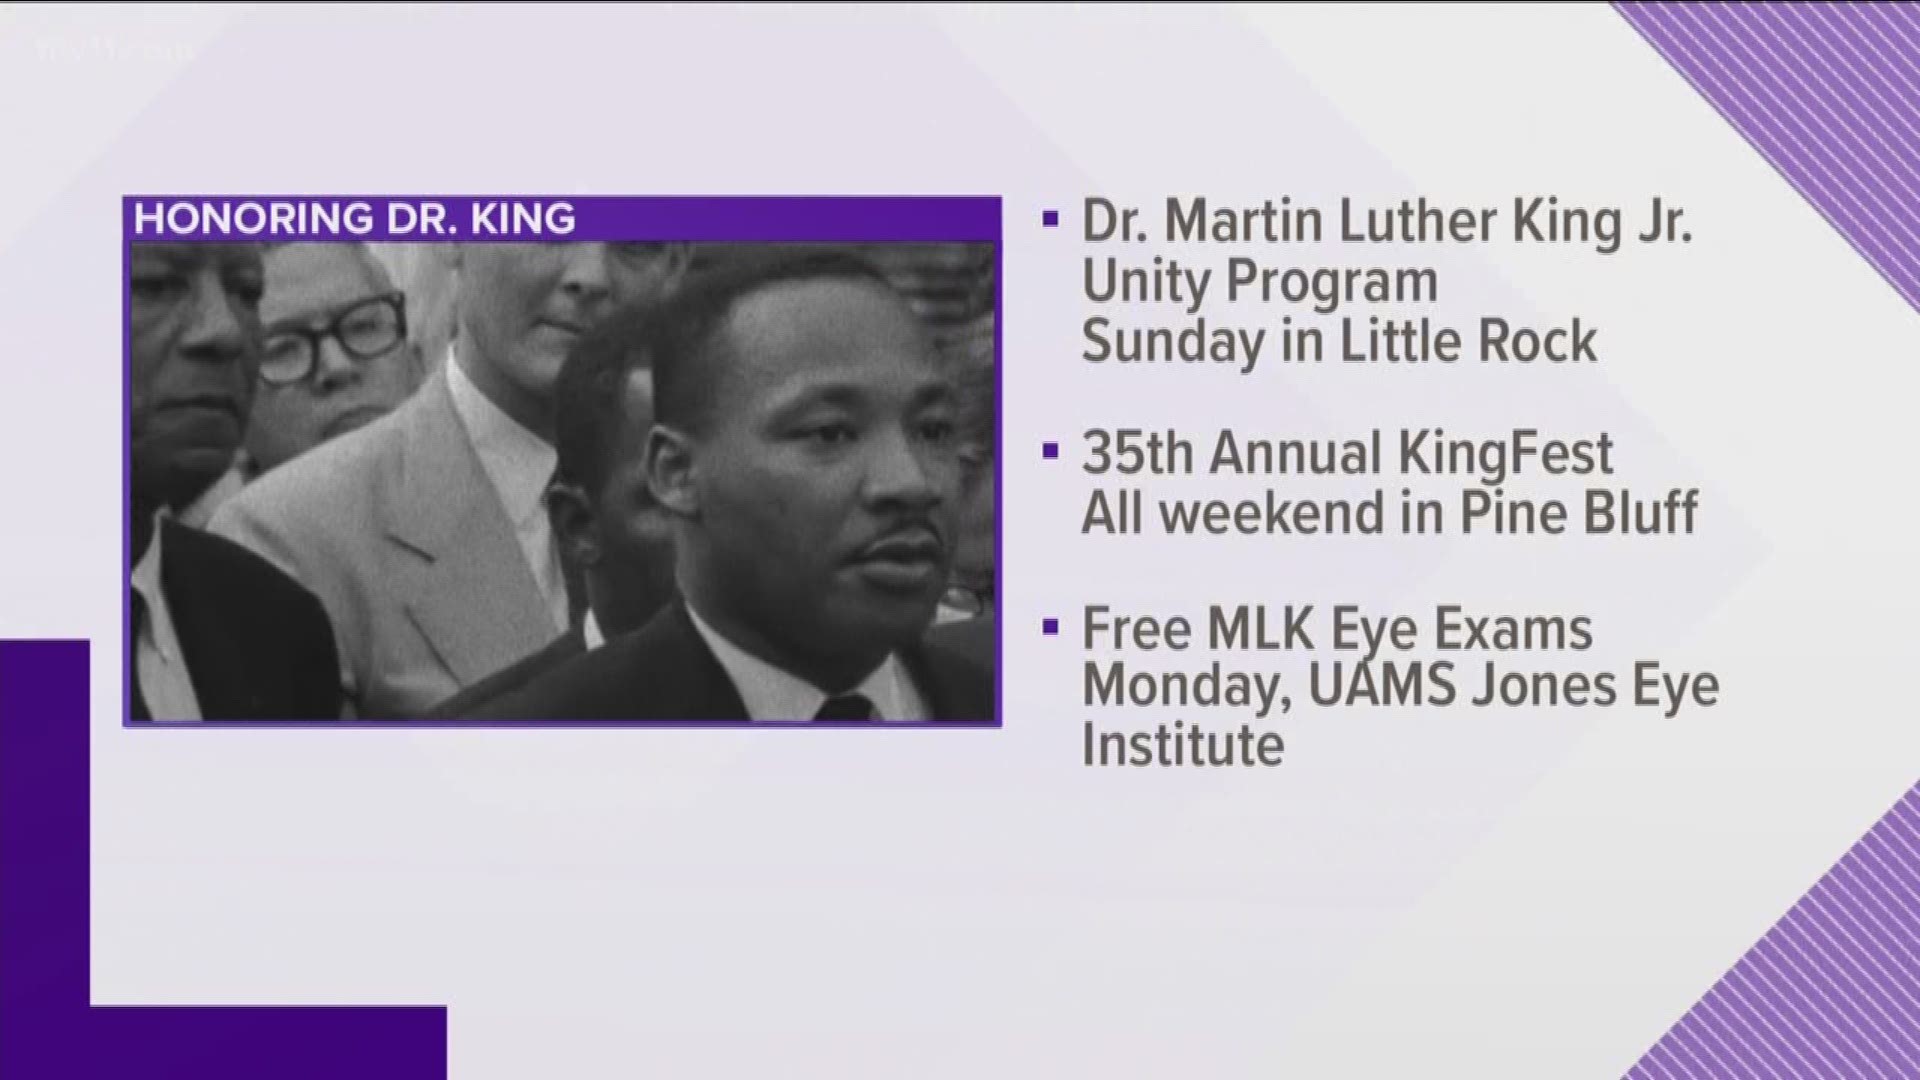 Martin Luther King Jr. Day is a United States holiday marking the birth date of the Reverend Martin Luther King, Jr.